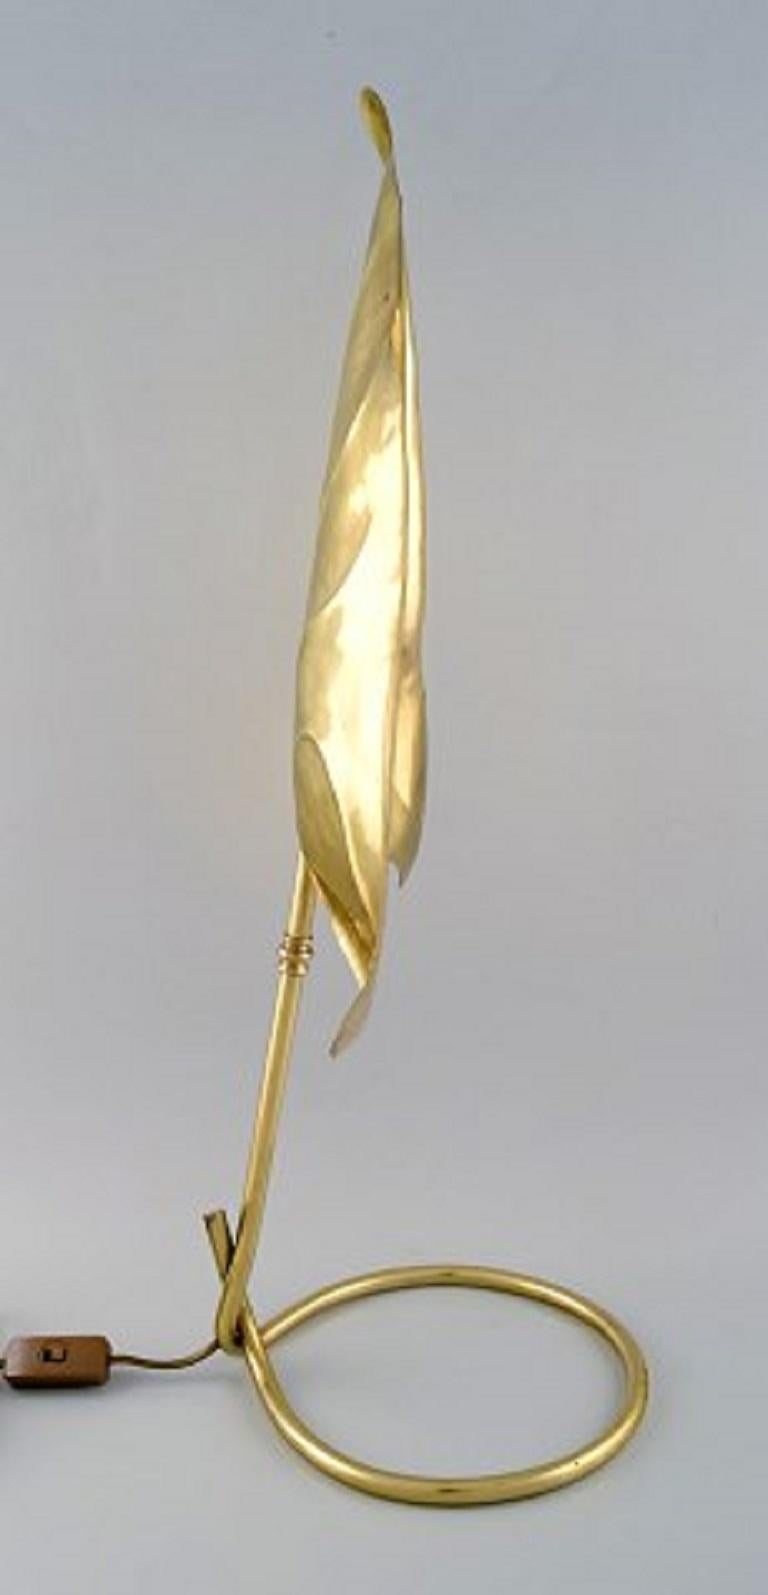 Tommaso Barbi, Italy. Leaf-shaped table lamp in brass, mid-20th century. Italian design.
Measures: 66 x 24 cm.
In very good condition.